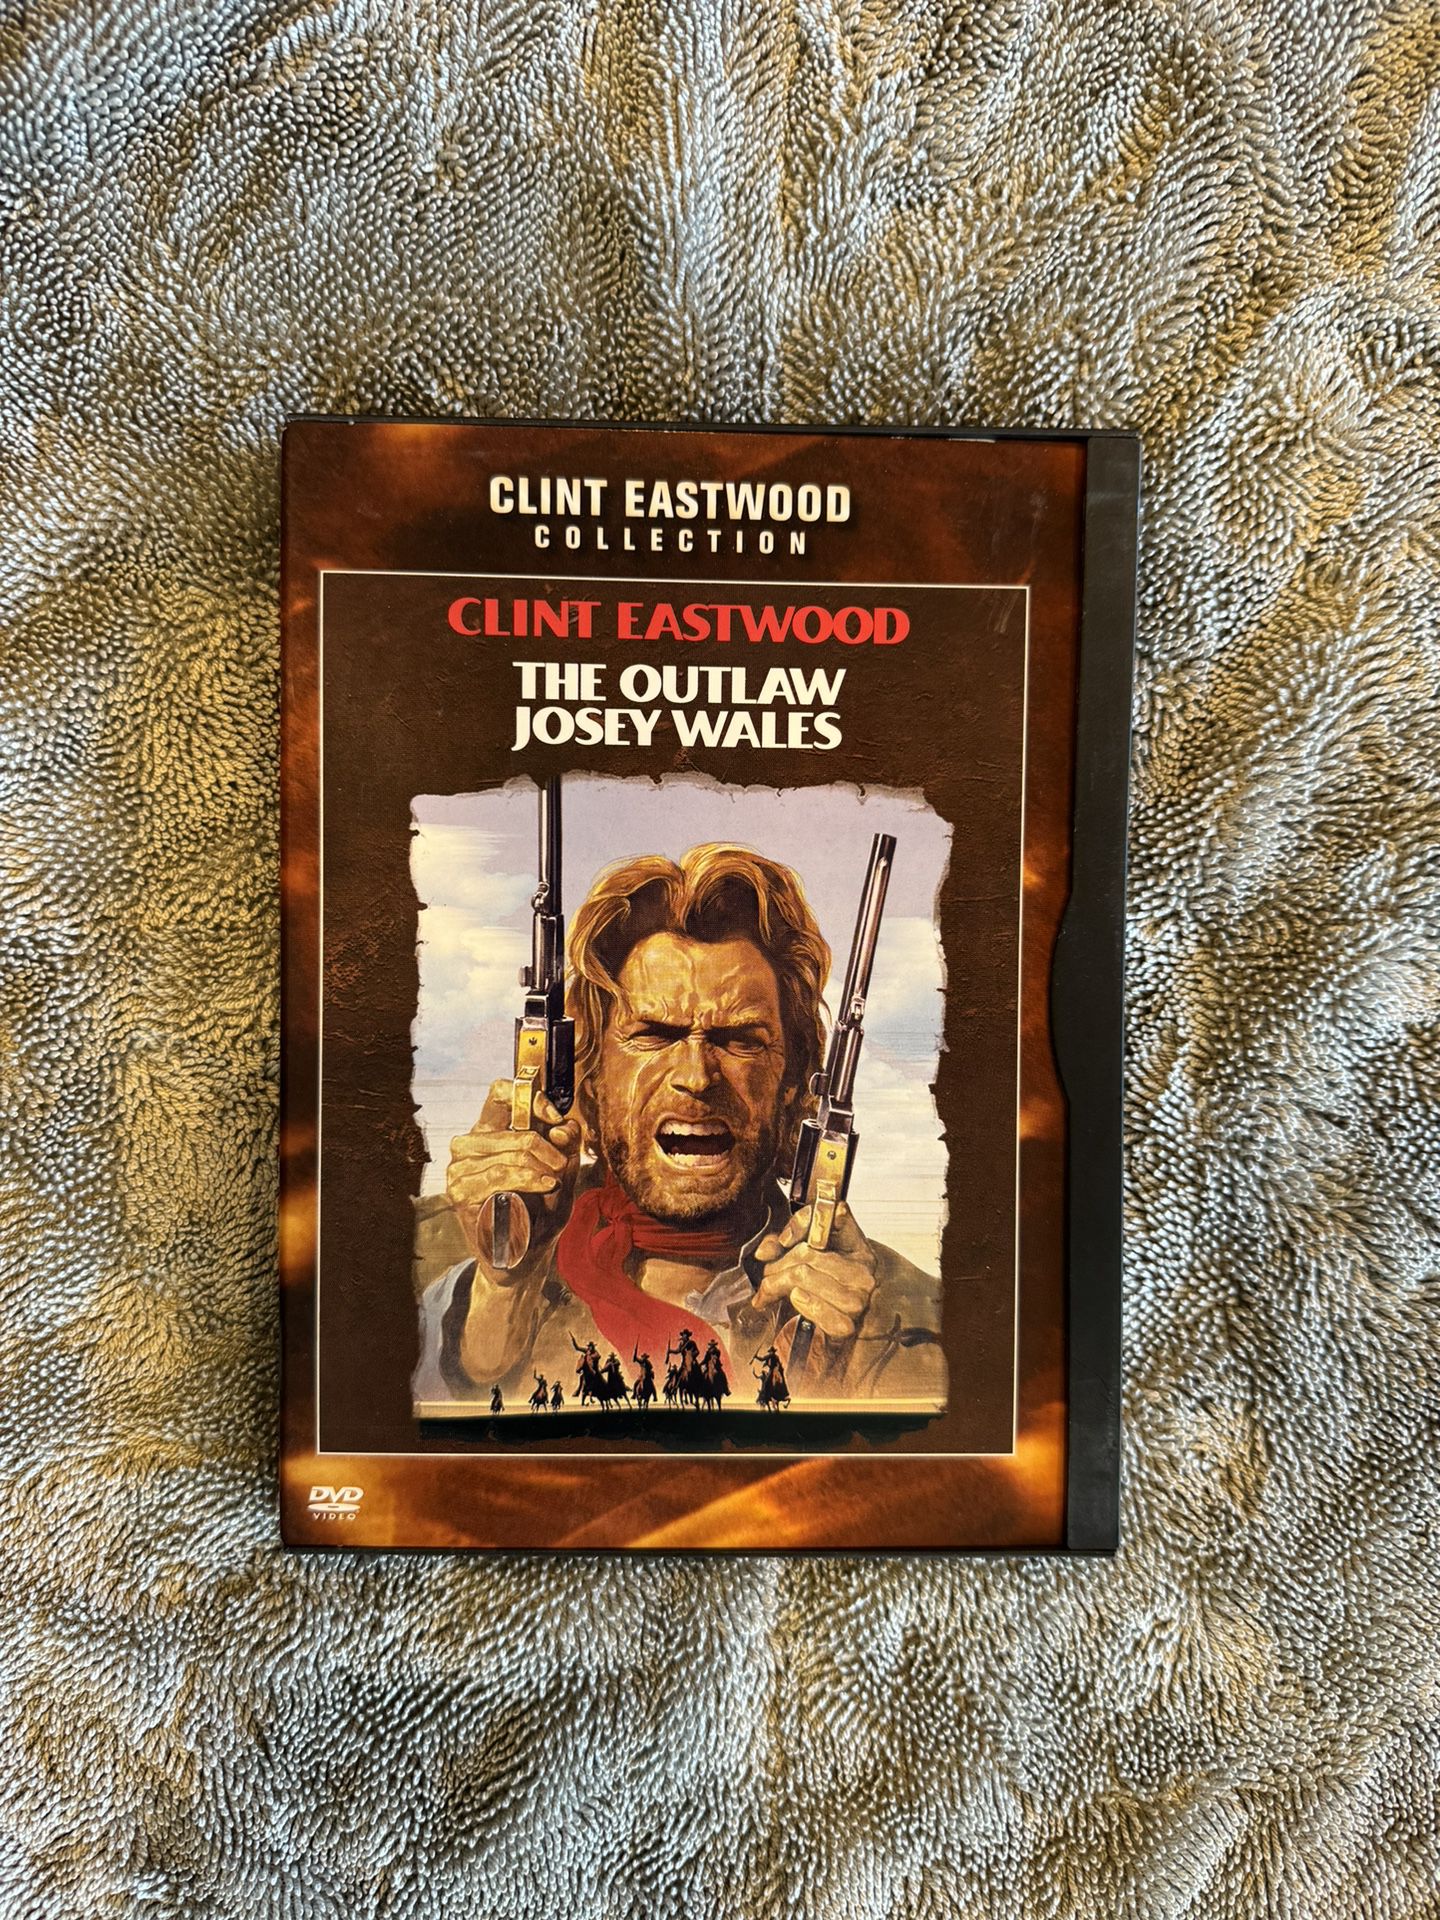 Clint Eastwood Directors Collection - 12 DVD/BluRay